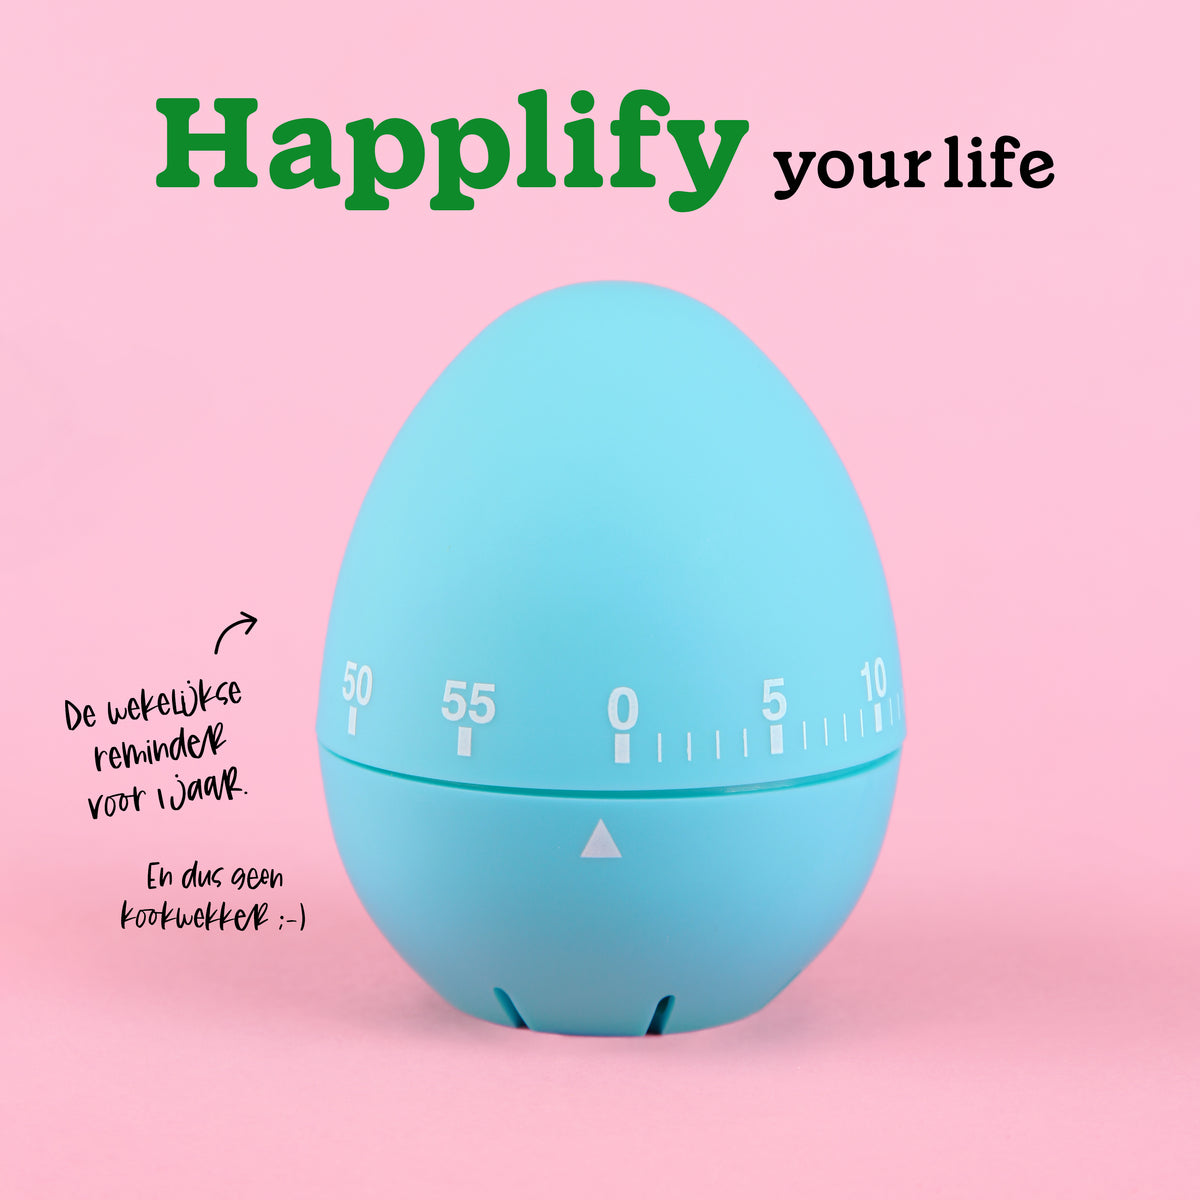 Happlify your life - Reminder